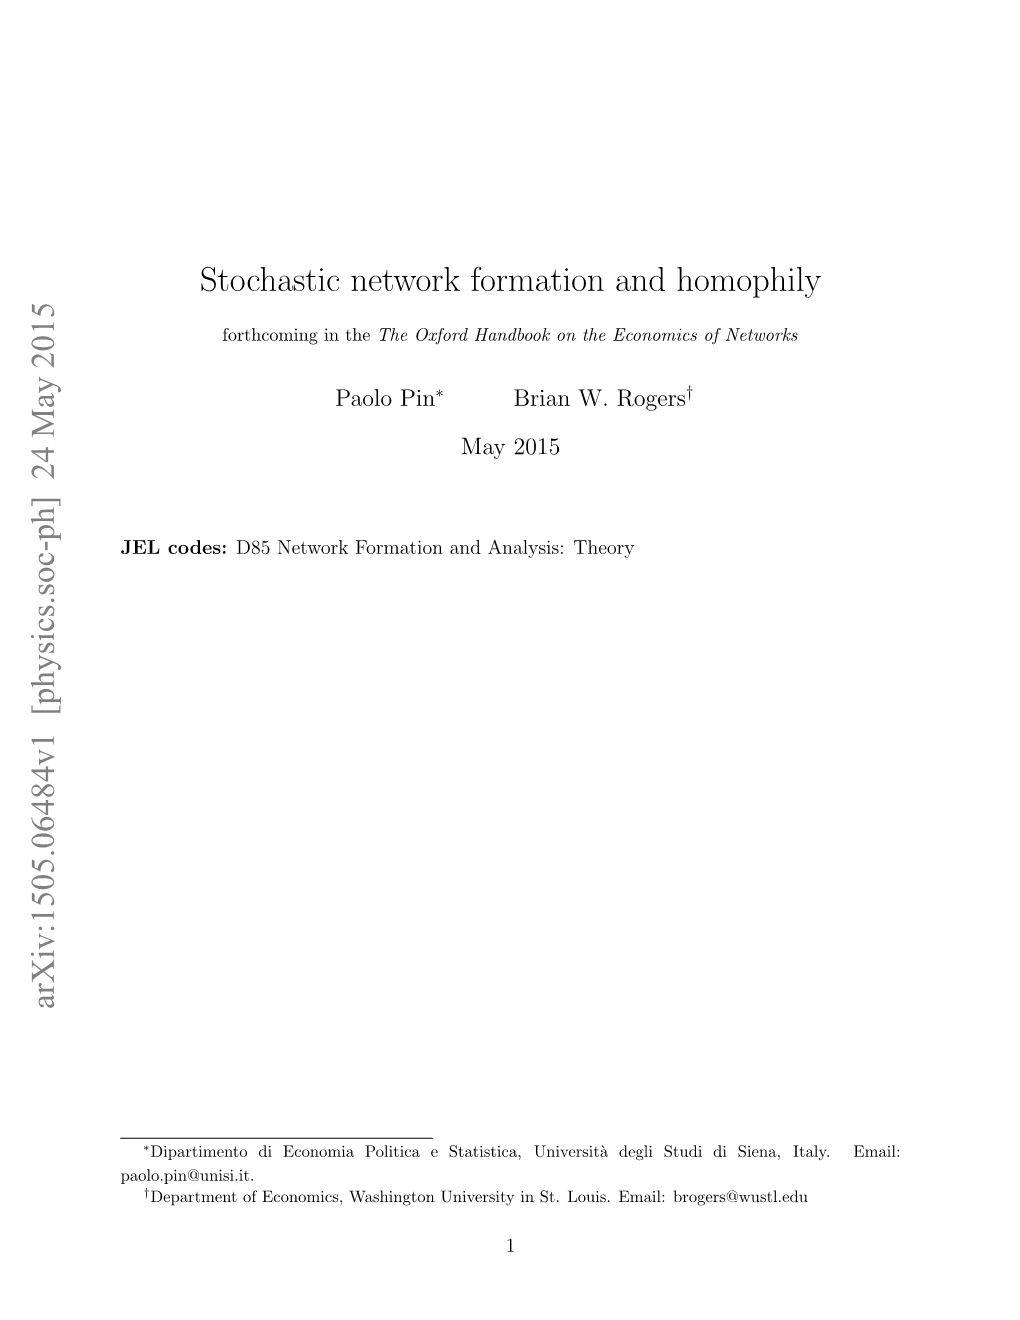 Stochastic Network Formation and Homophily Arxiv:1505.06484V1